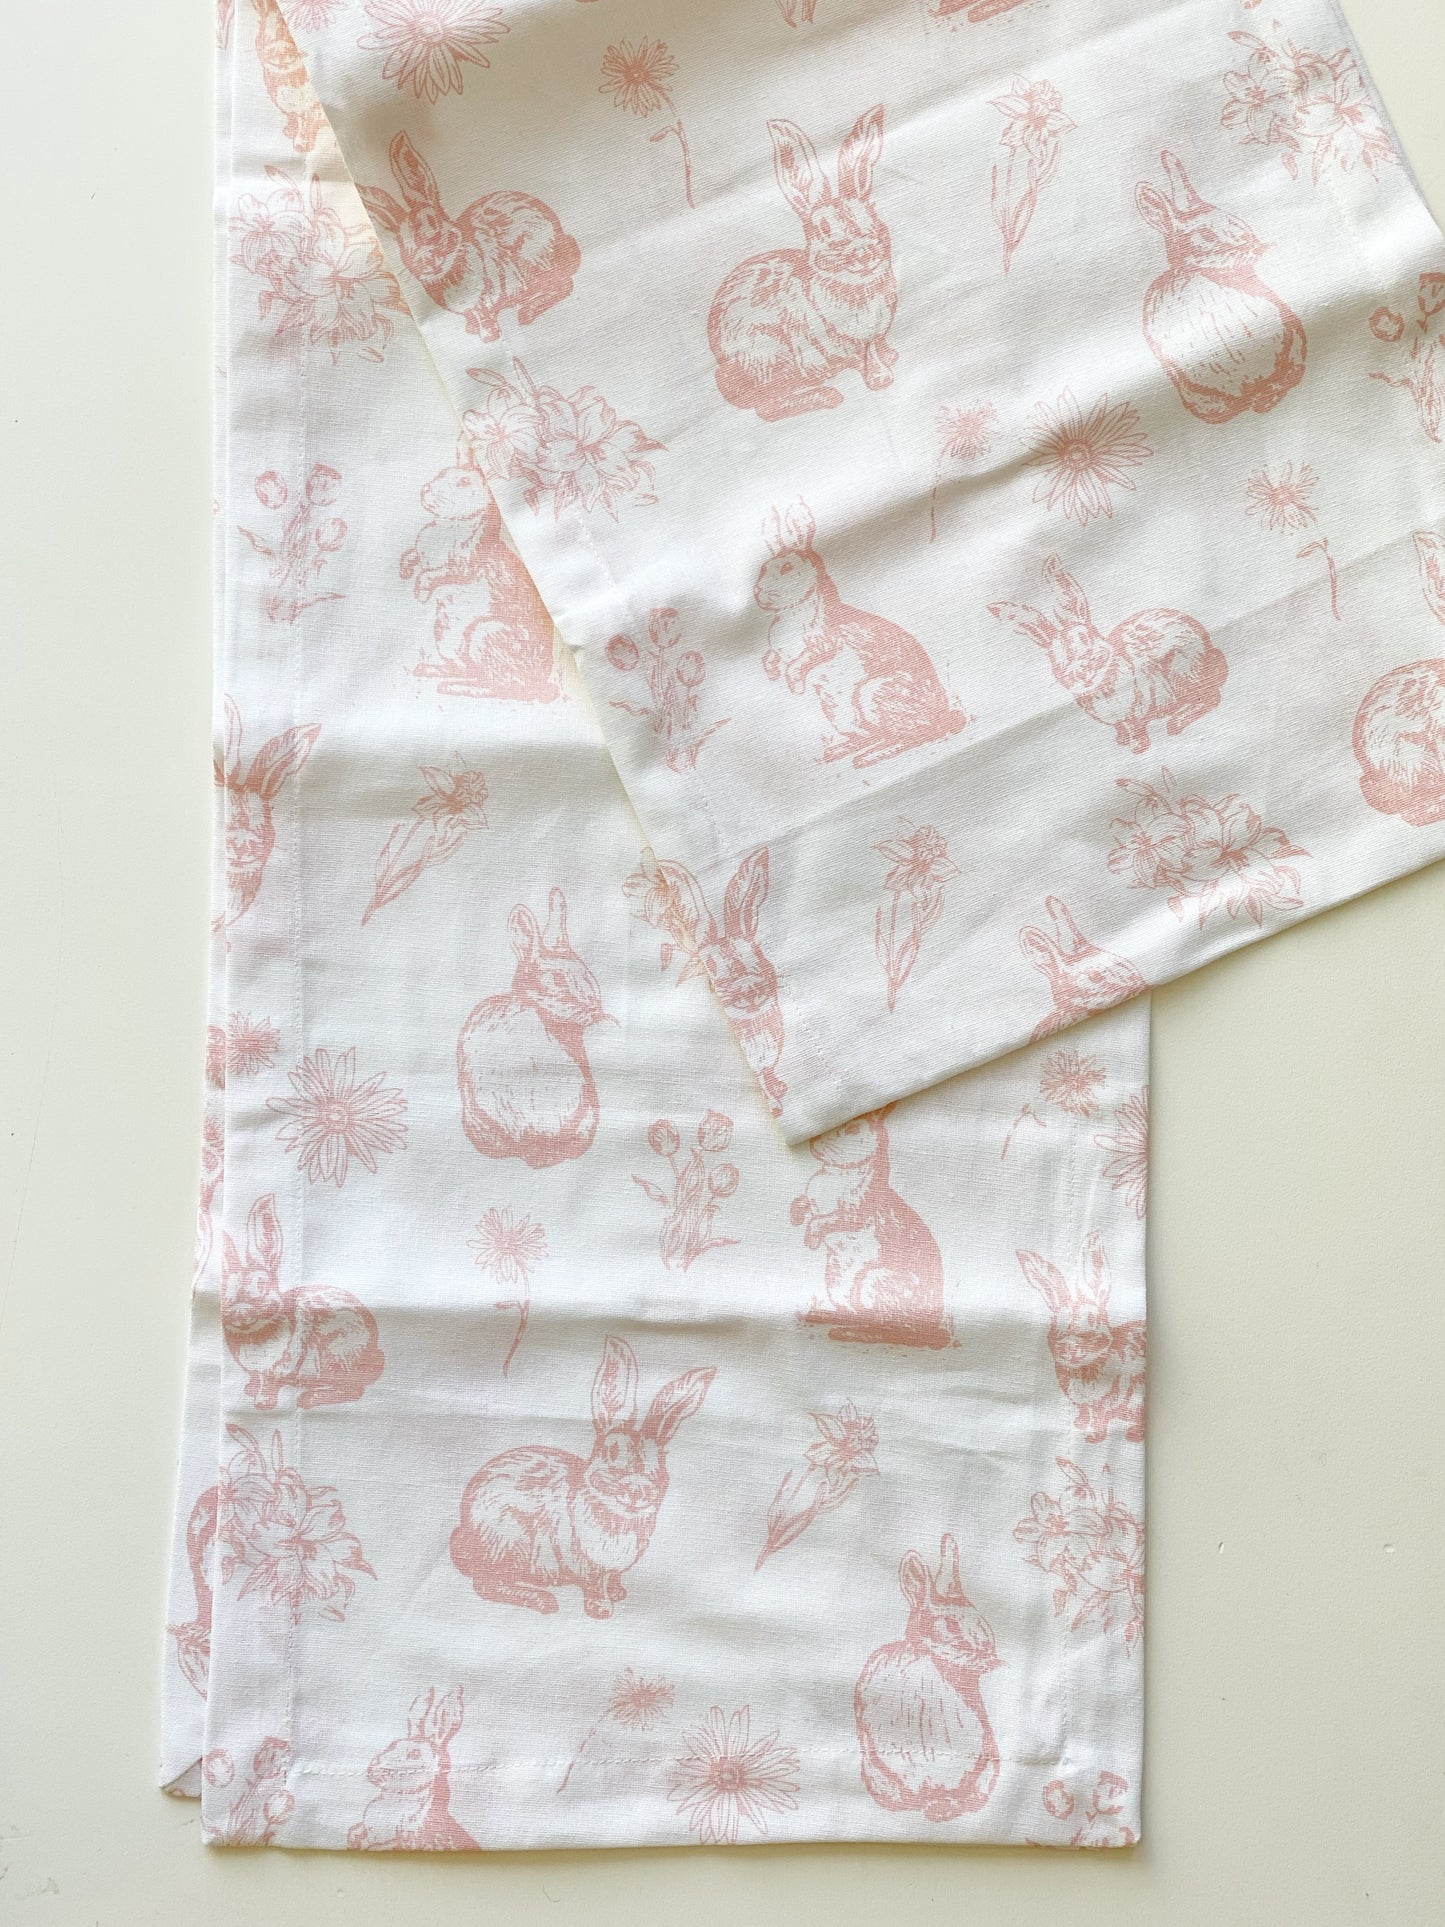 Lily Bunny Table Runner